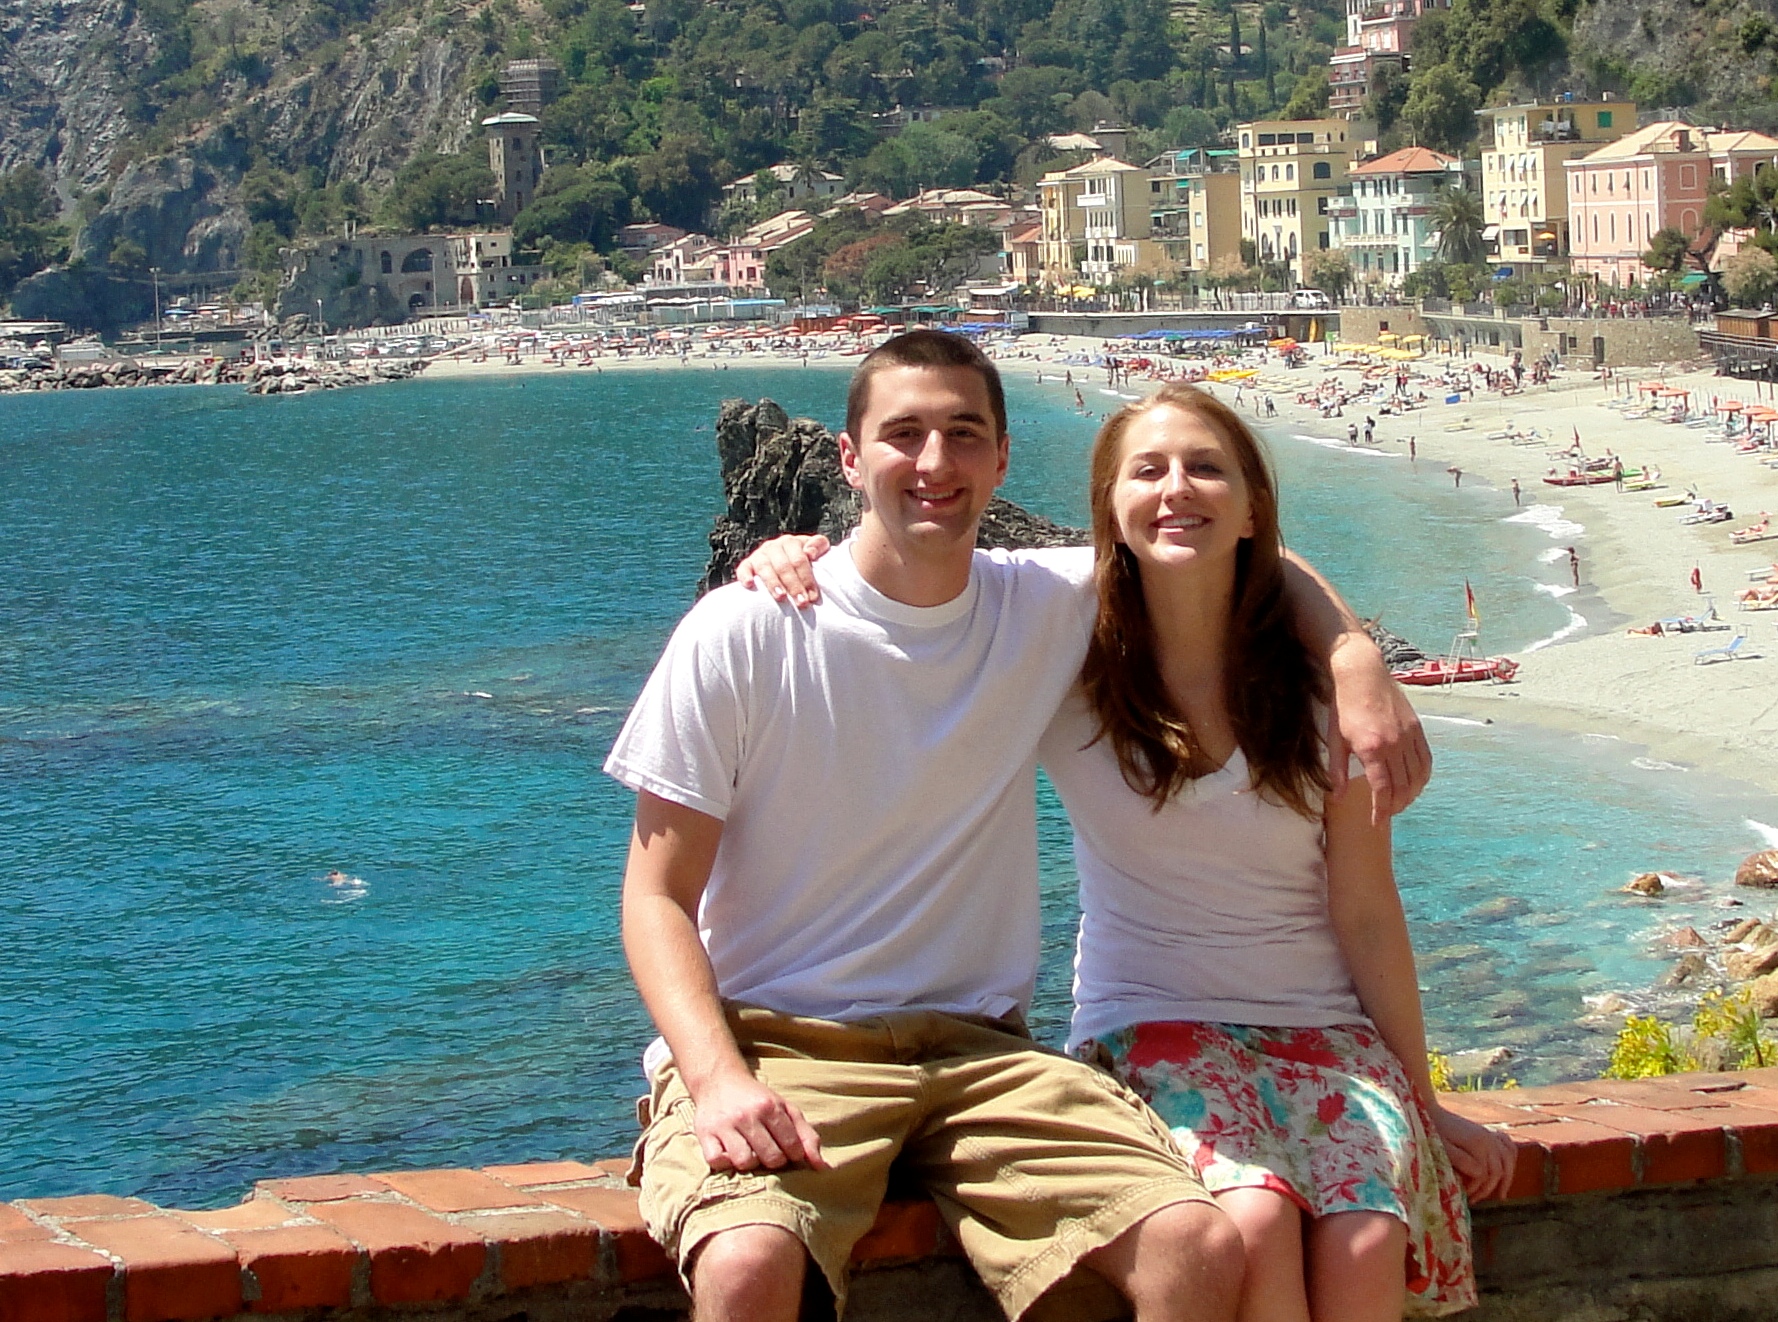 Picture of my sister, Megan Kelbel, and I in Italy.